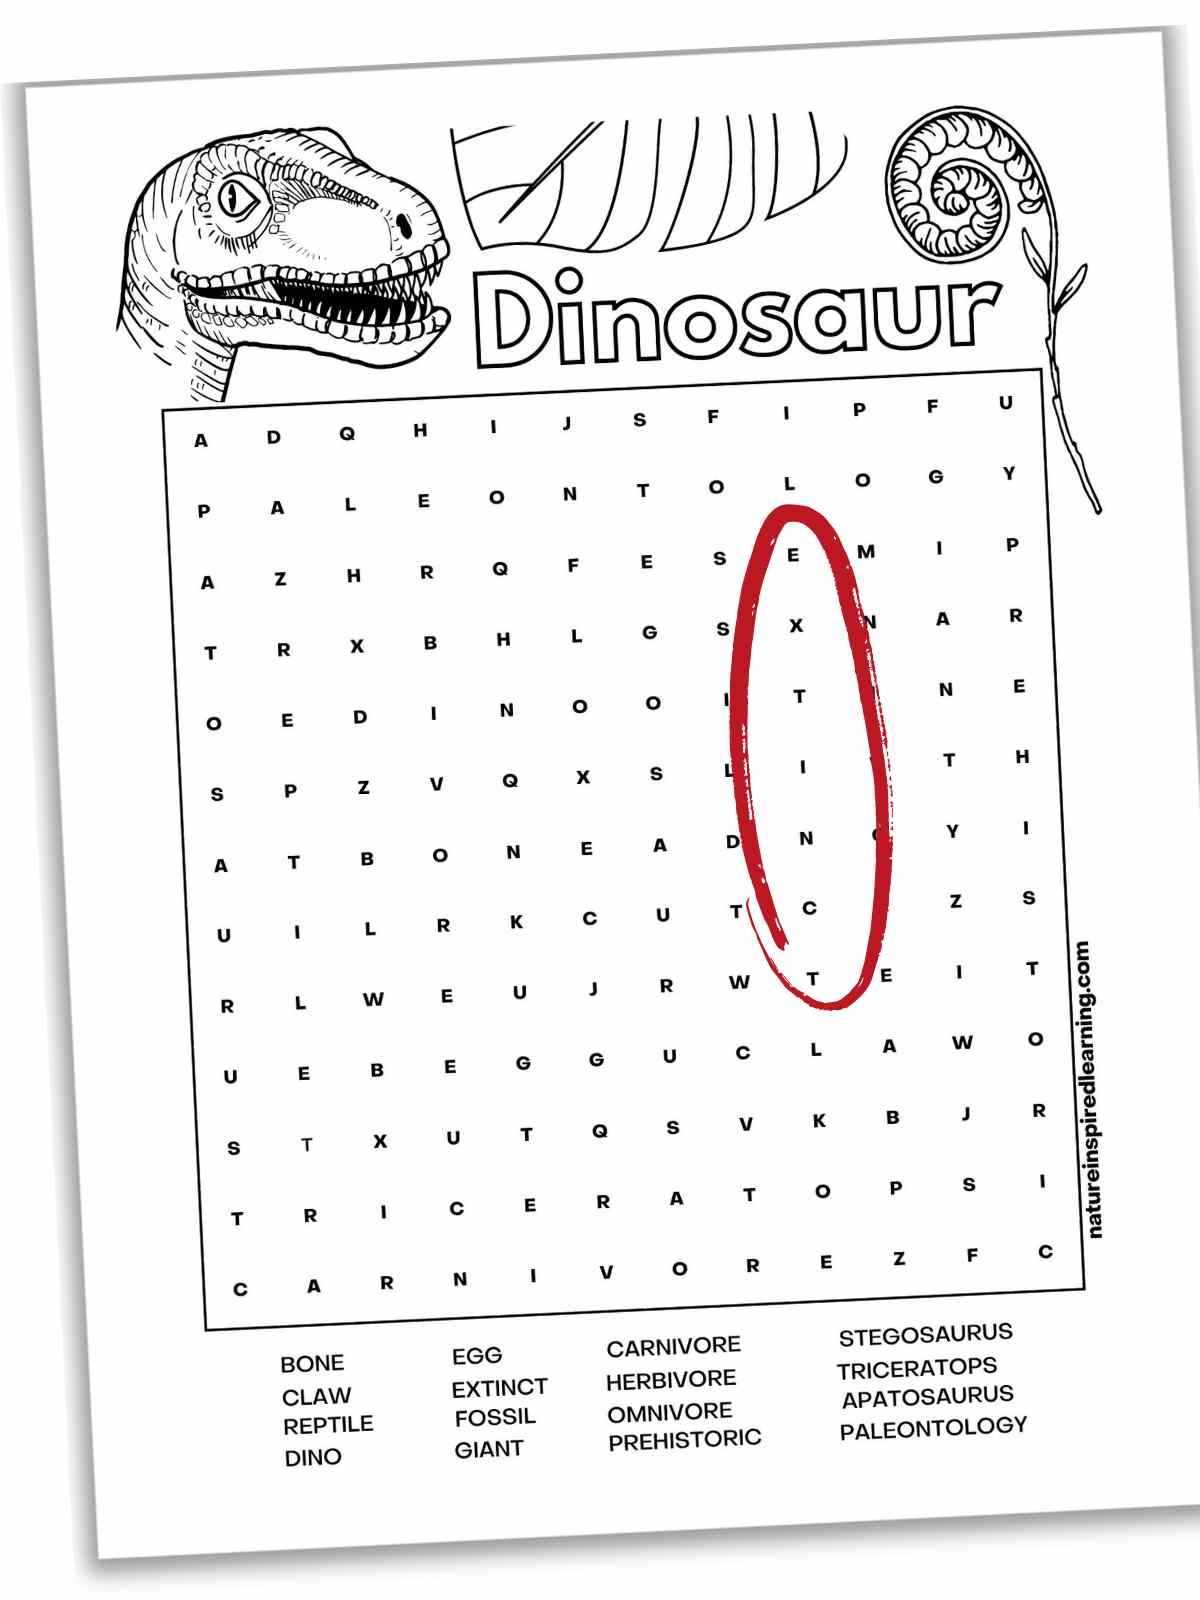 black and white dinosaur word search with sixteen hidden words, dinosaur clip art at the top, and extinct circled in red.